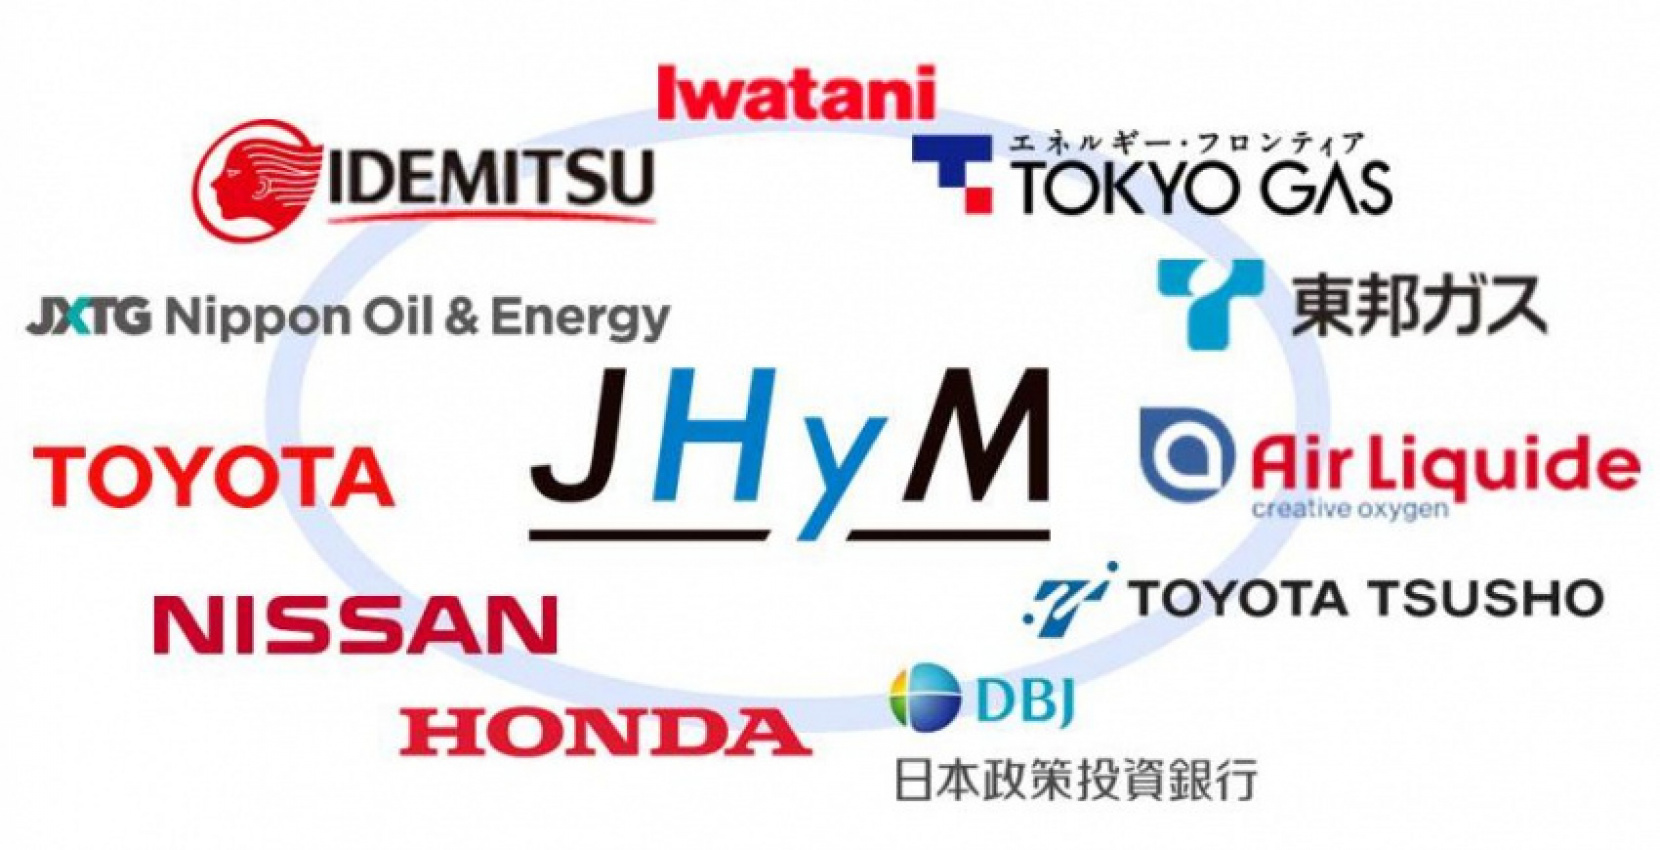 autos, cars, honda, nissan, toyota, autos toyota, toyota, honda and nissan in venture to build more hydrogen stations